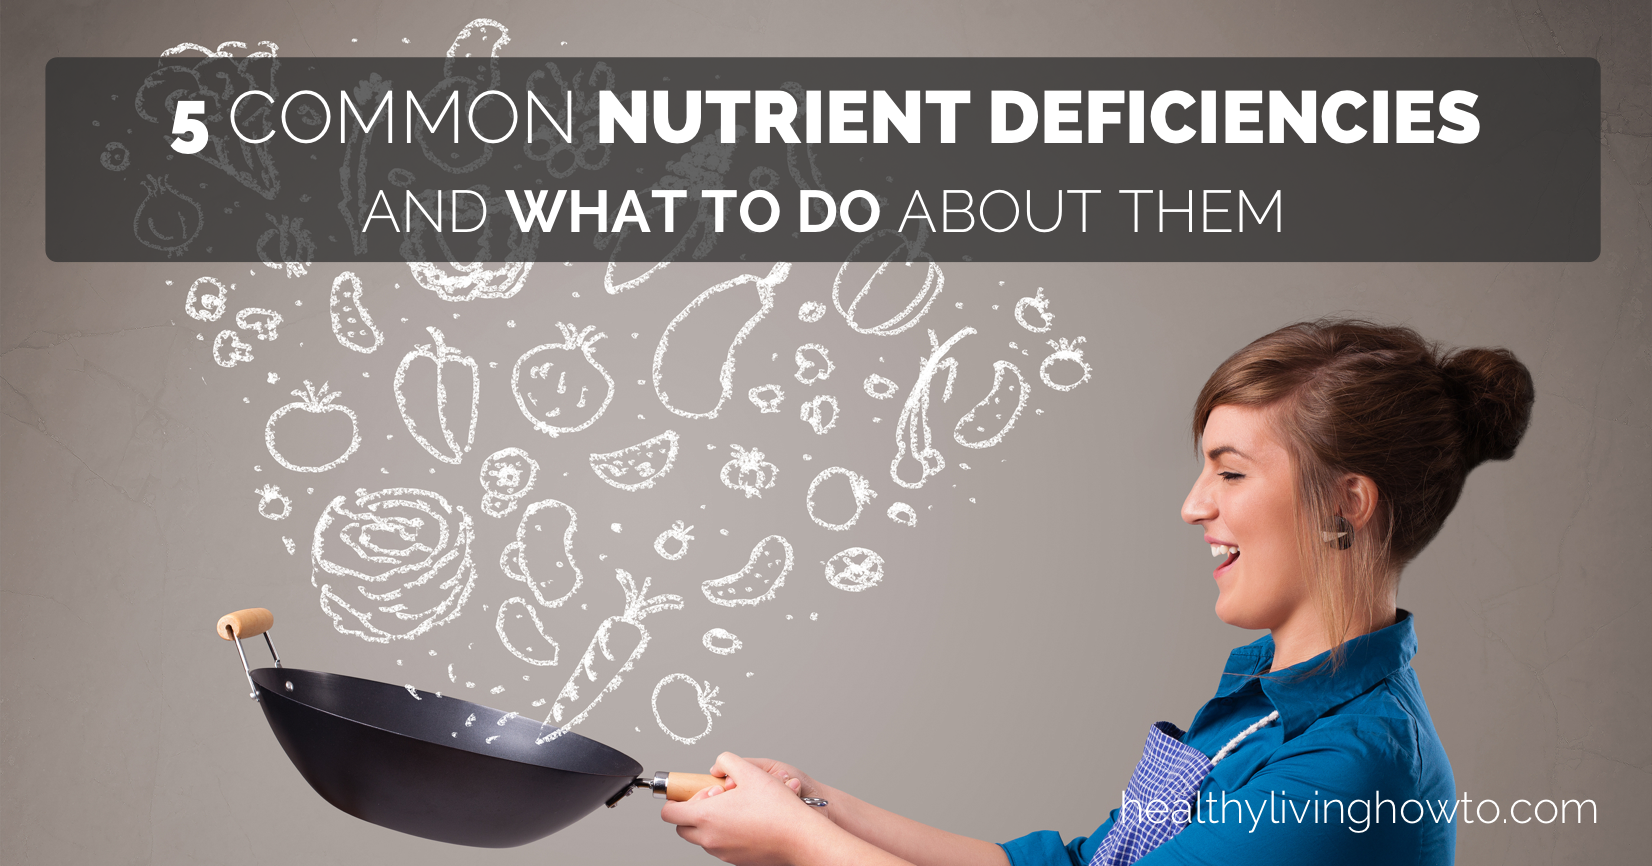 5 Common Nutrient Deficiencies And What To Do About Them | healthylivinghowto.com